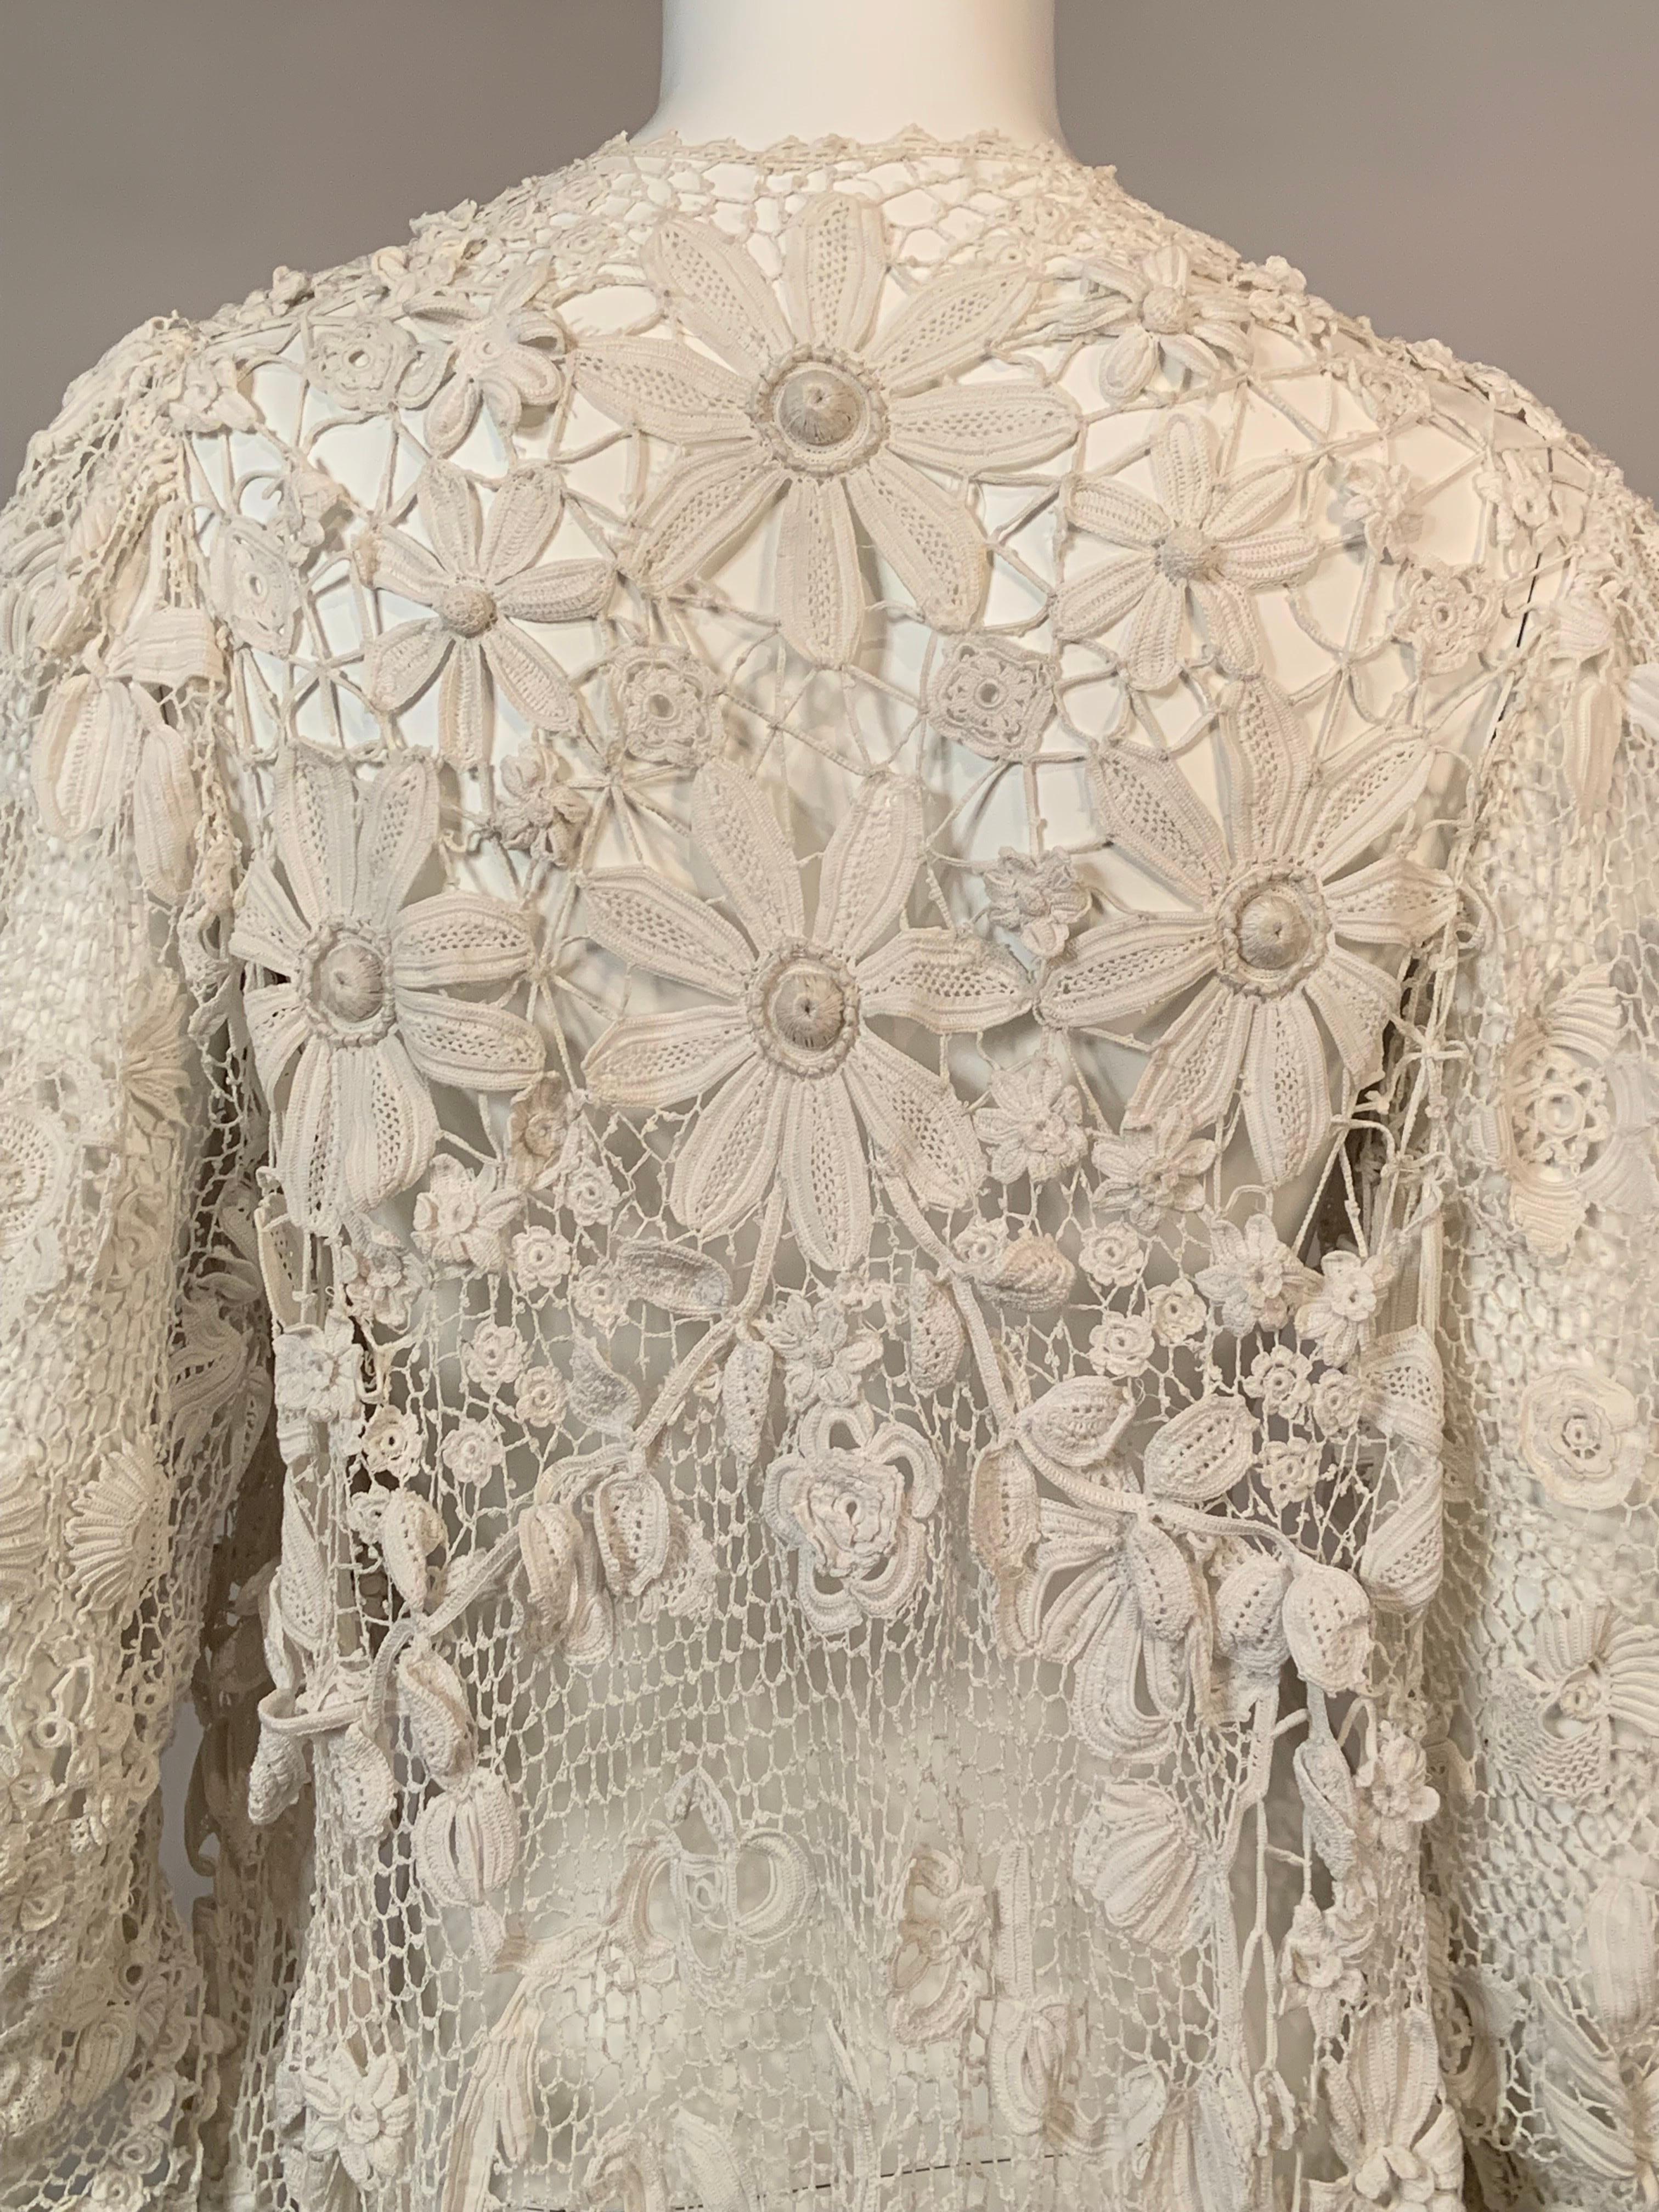 Hand Made Irish Lace Coat with Unusual Large Floral Border circa 1900 For Sale 9